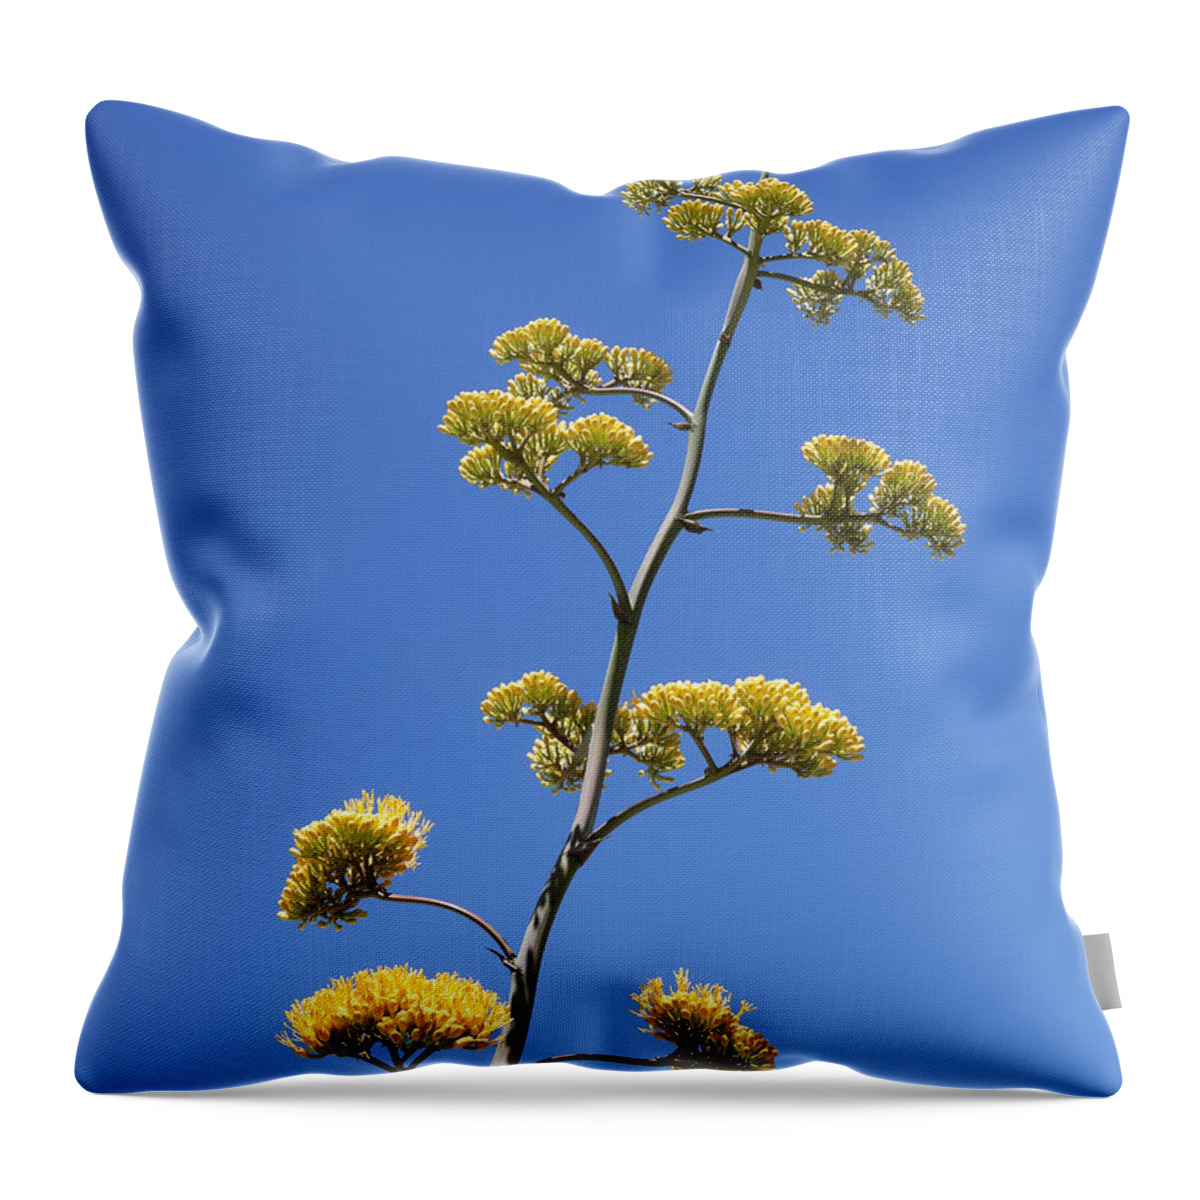 Century Plant Throw Pillow featuring the photograph Century Plant Flowers by Kelley King